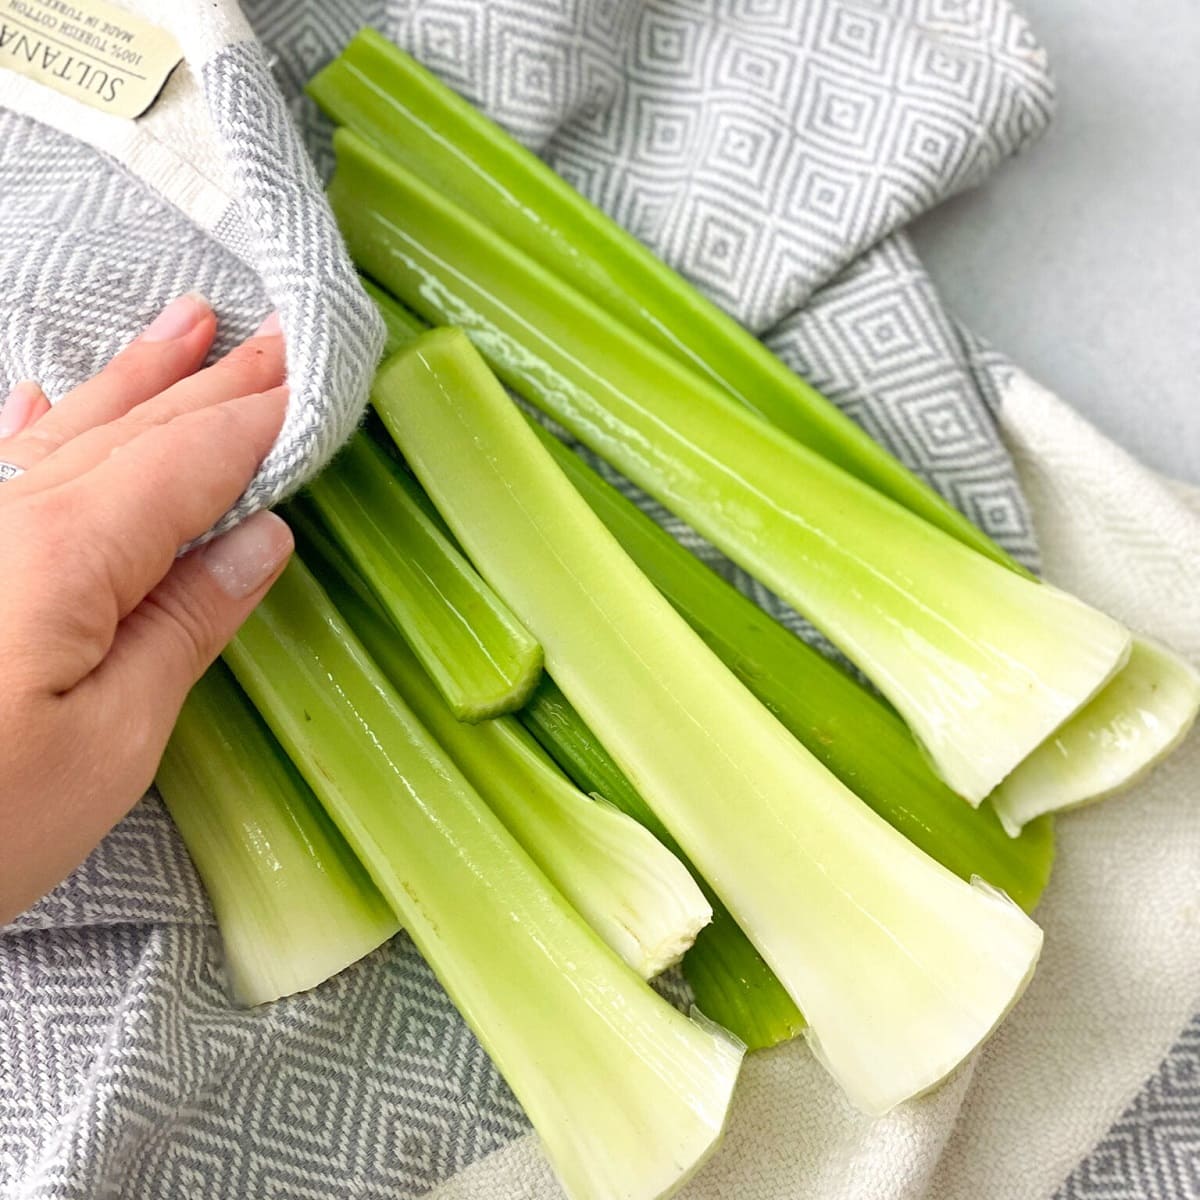 How To Store Celery To Last Longer